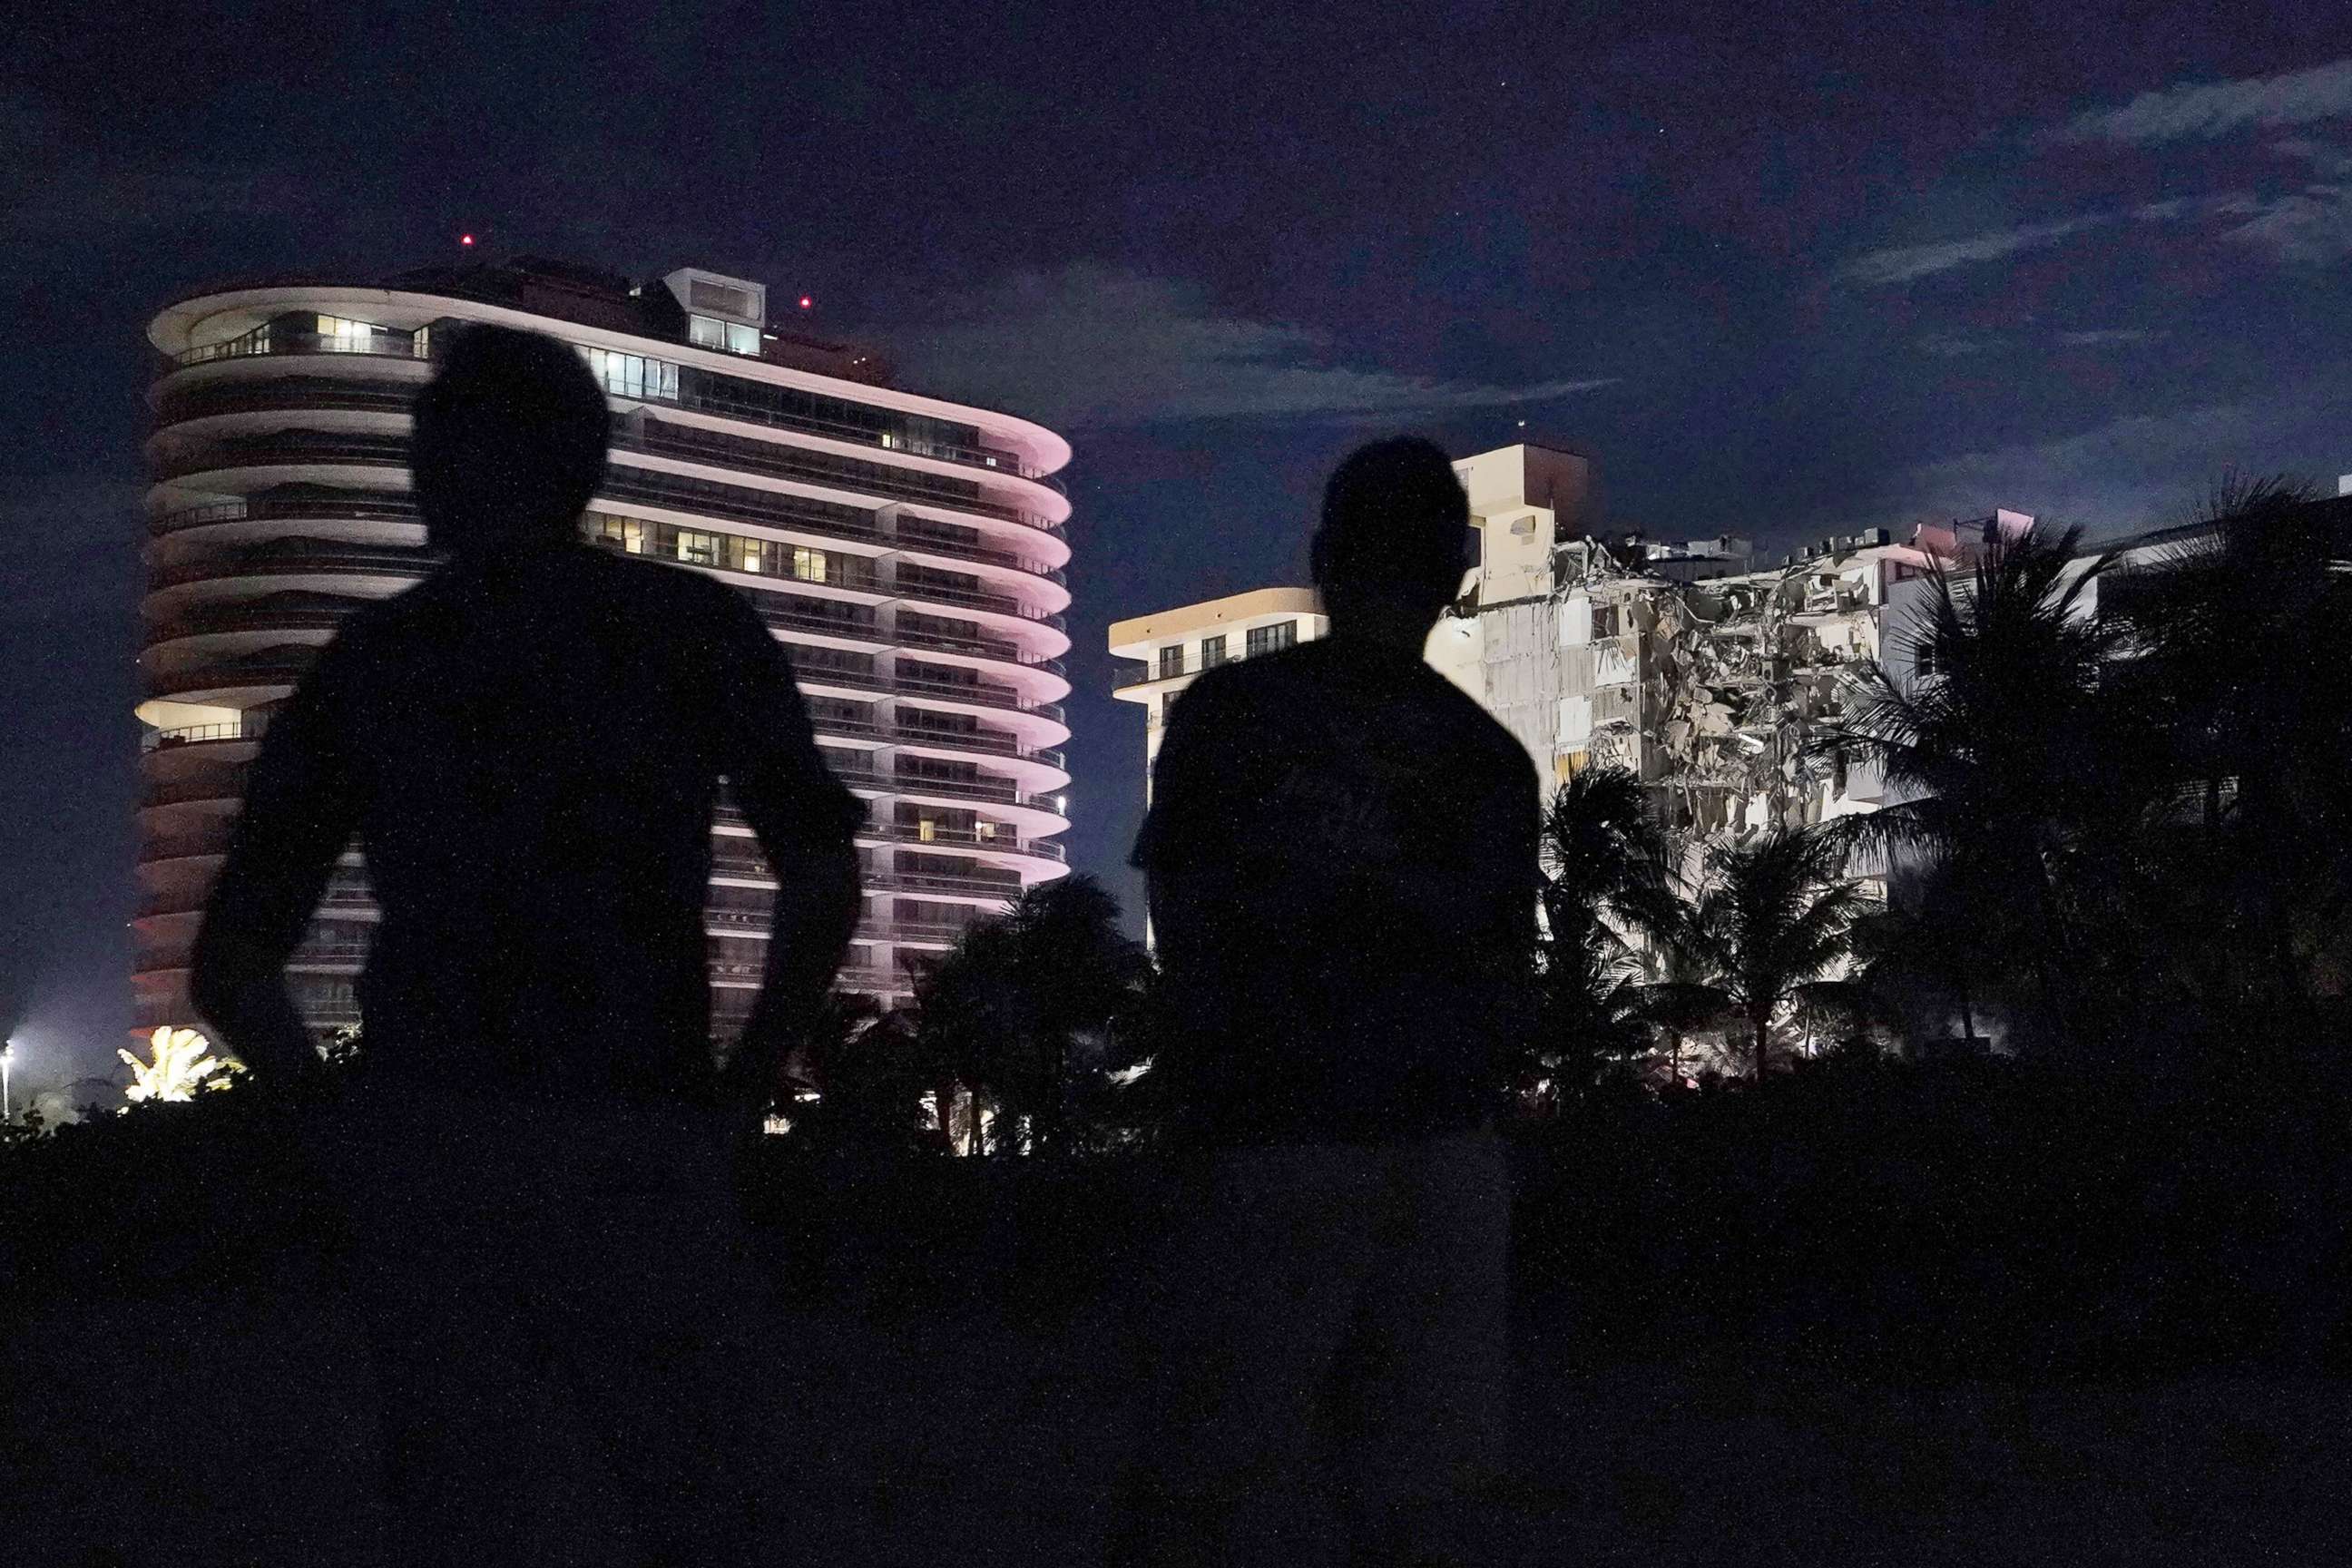 PHOTO: People look at the partially collapsed condo building in the early hours of June 24, 2021, in the Surfside area of Miami, Fla.